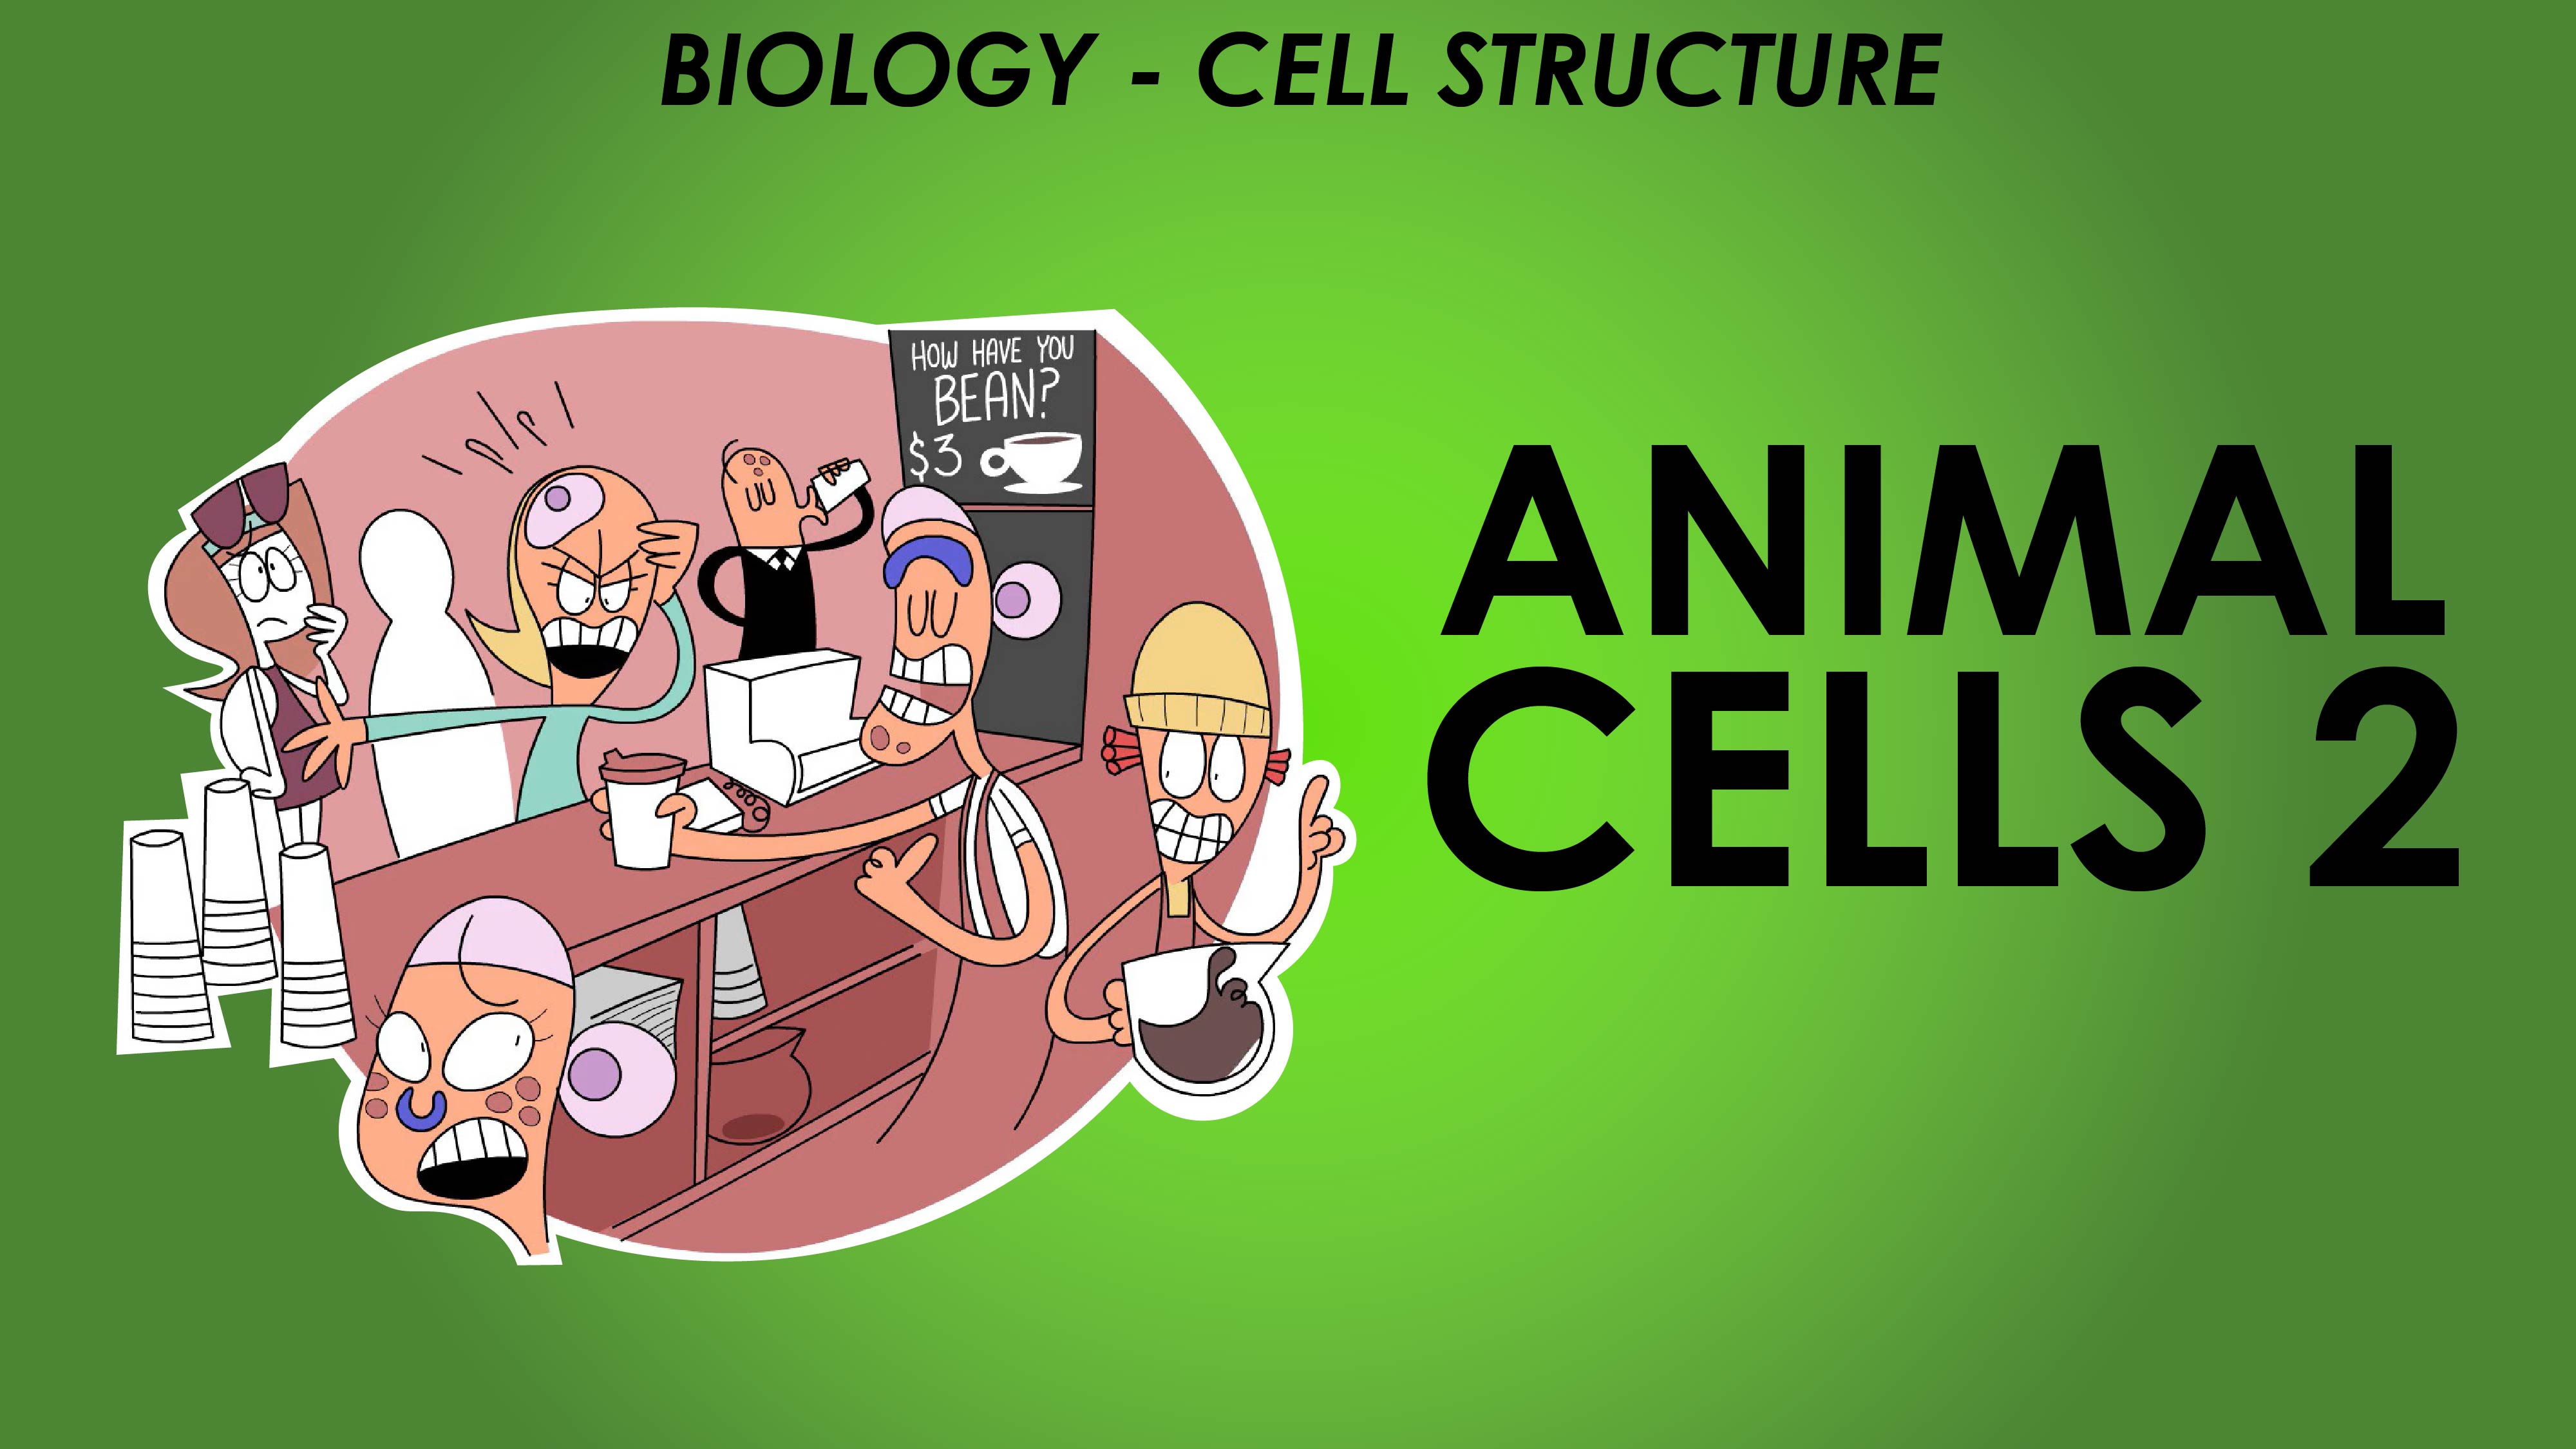 Animal Cells 2 - Cell Structure